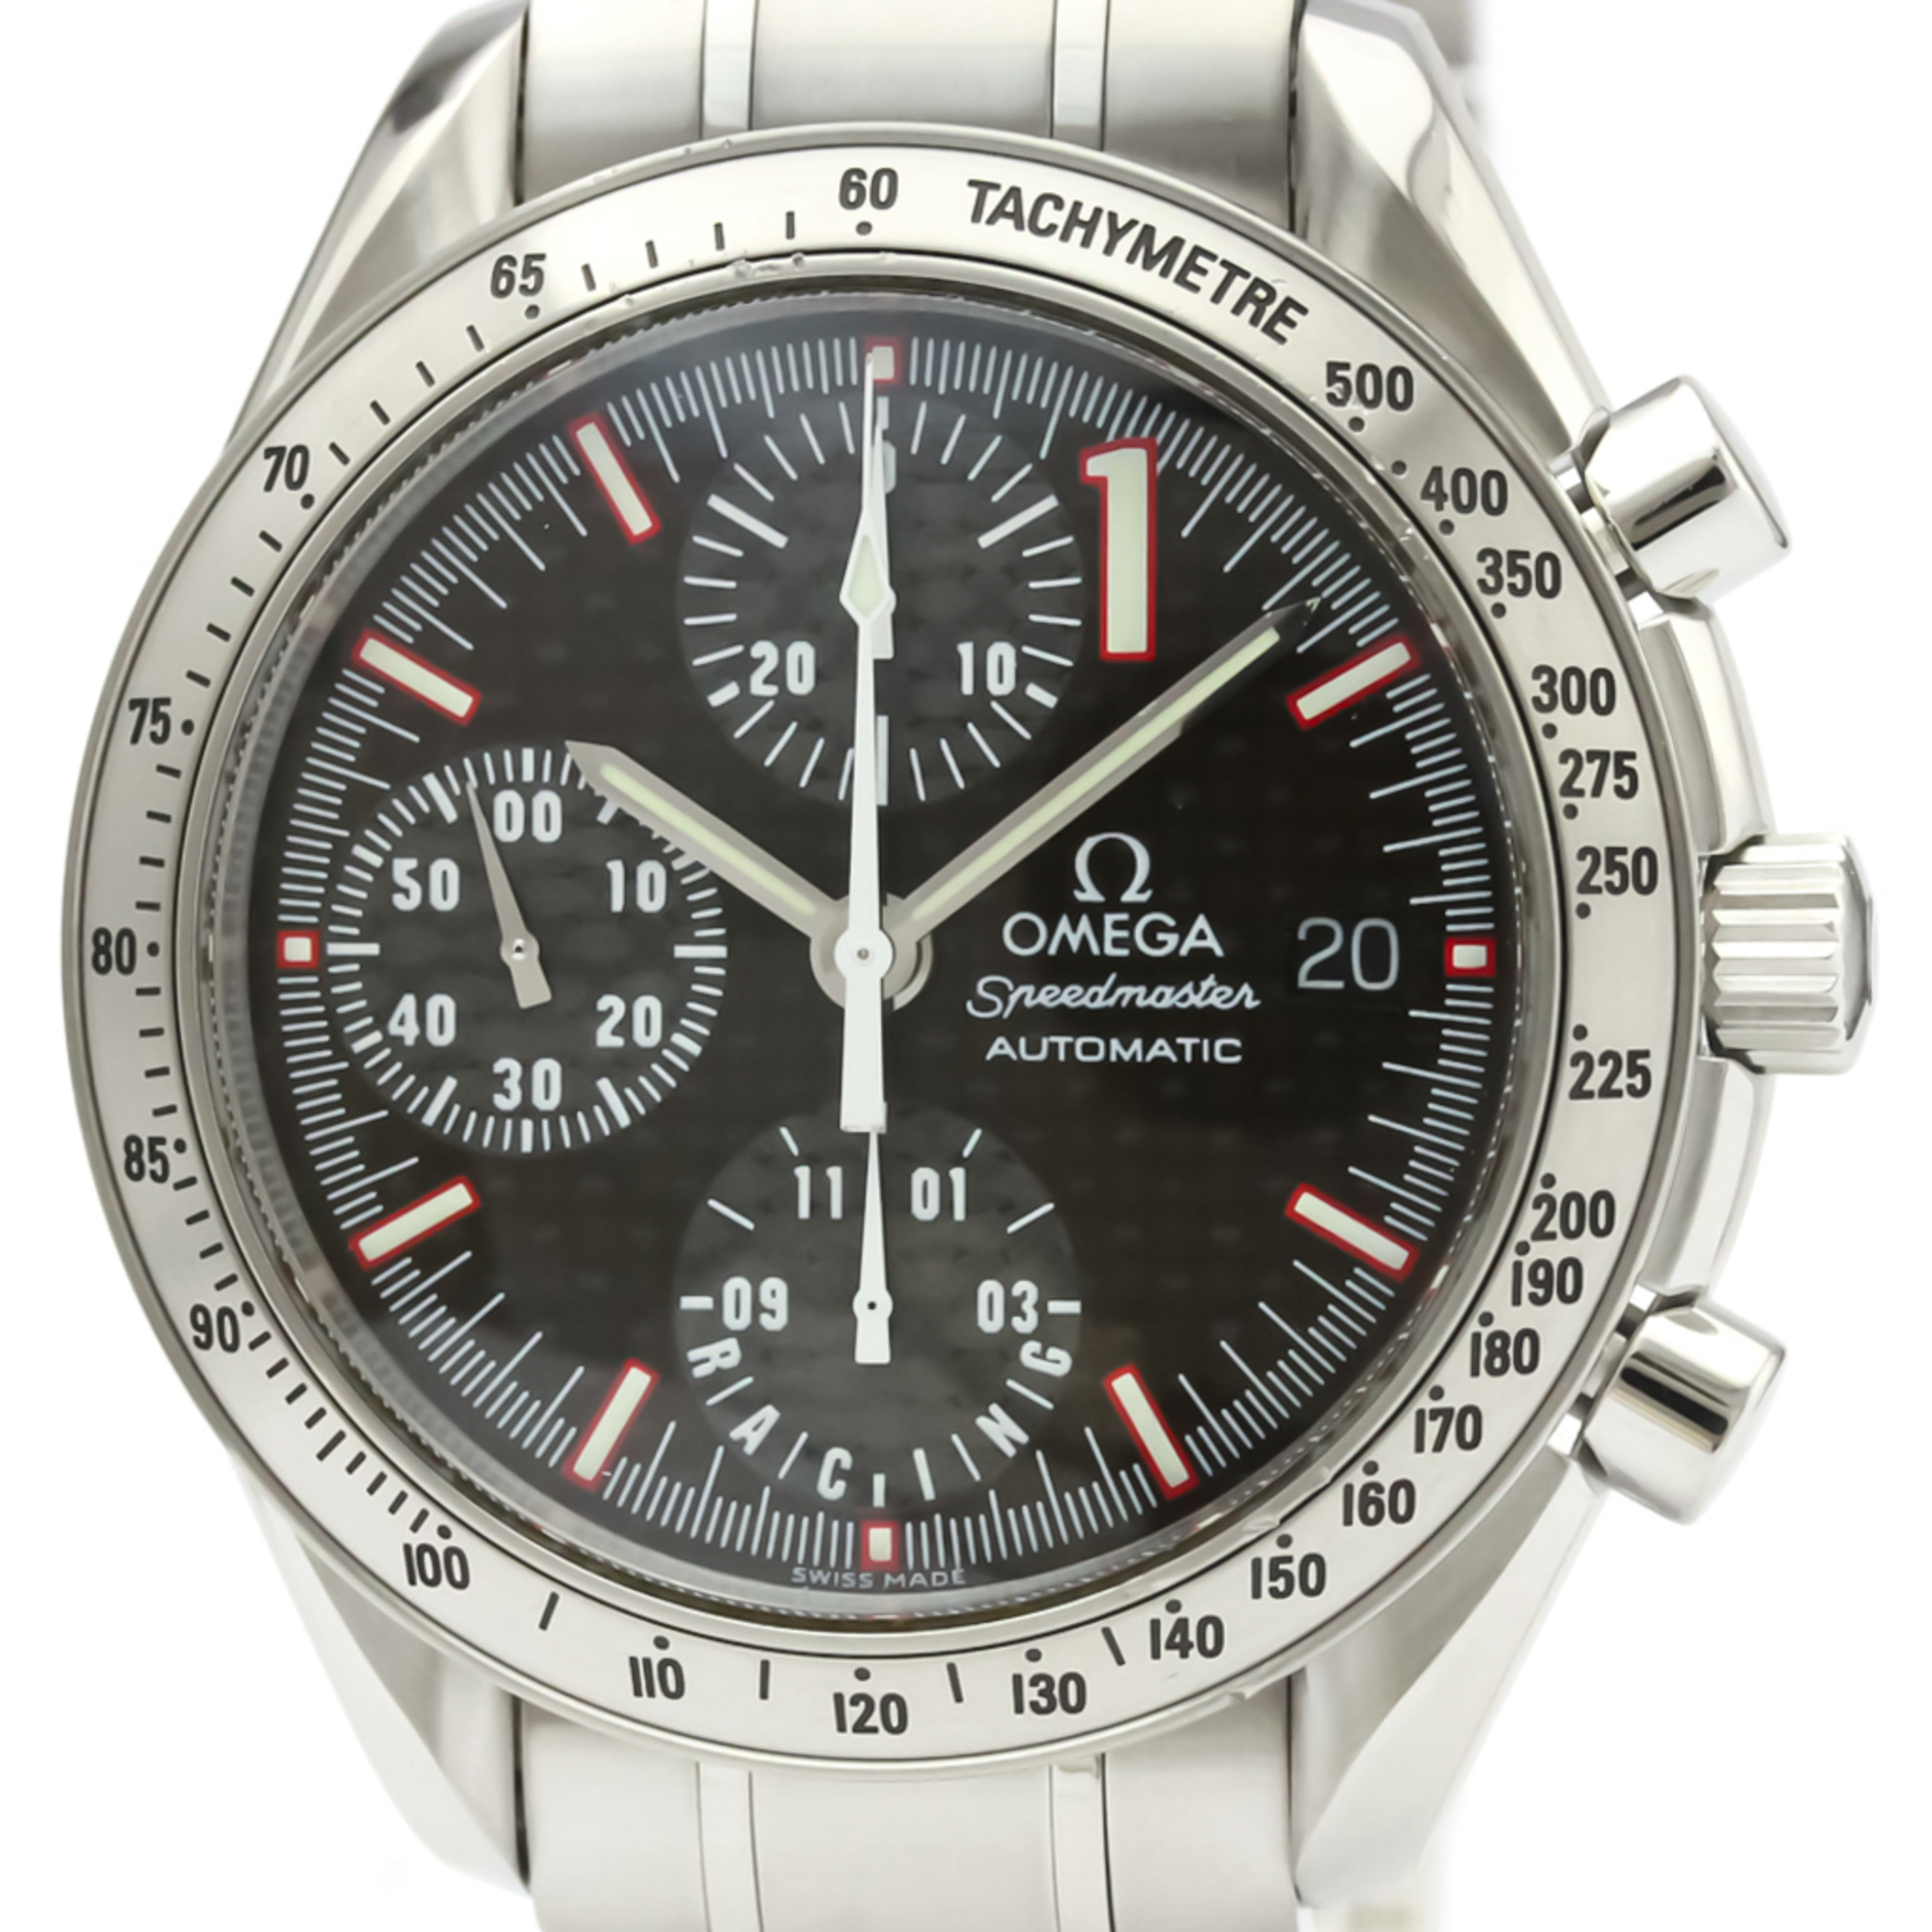 Omega Speedmaster Automatic Stainless Steel Men's Sports Watch 3519.50